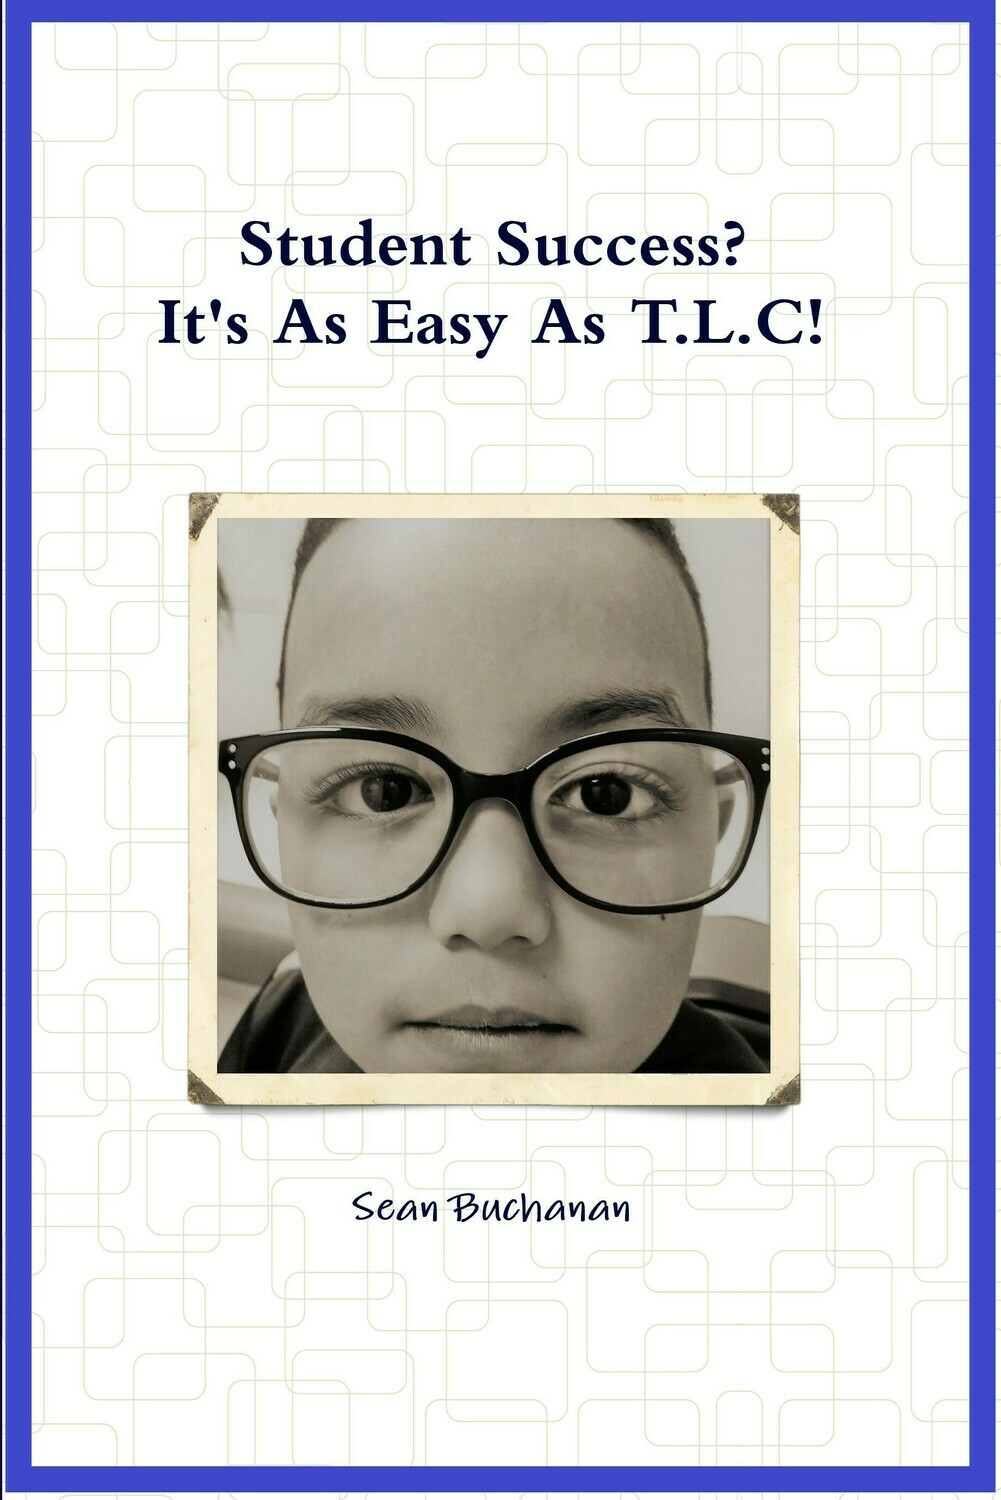 Student Success?  It's As Easy As T.L.C!